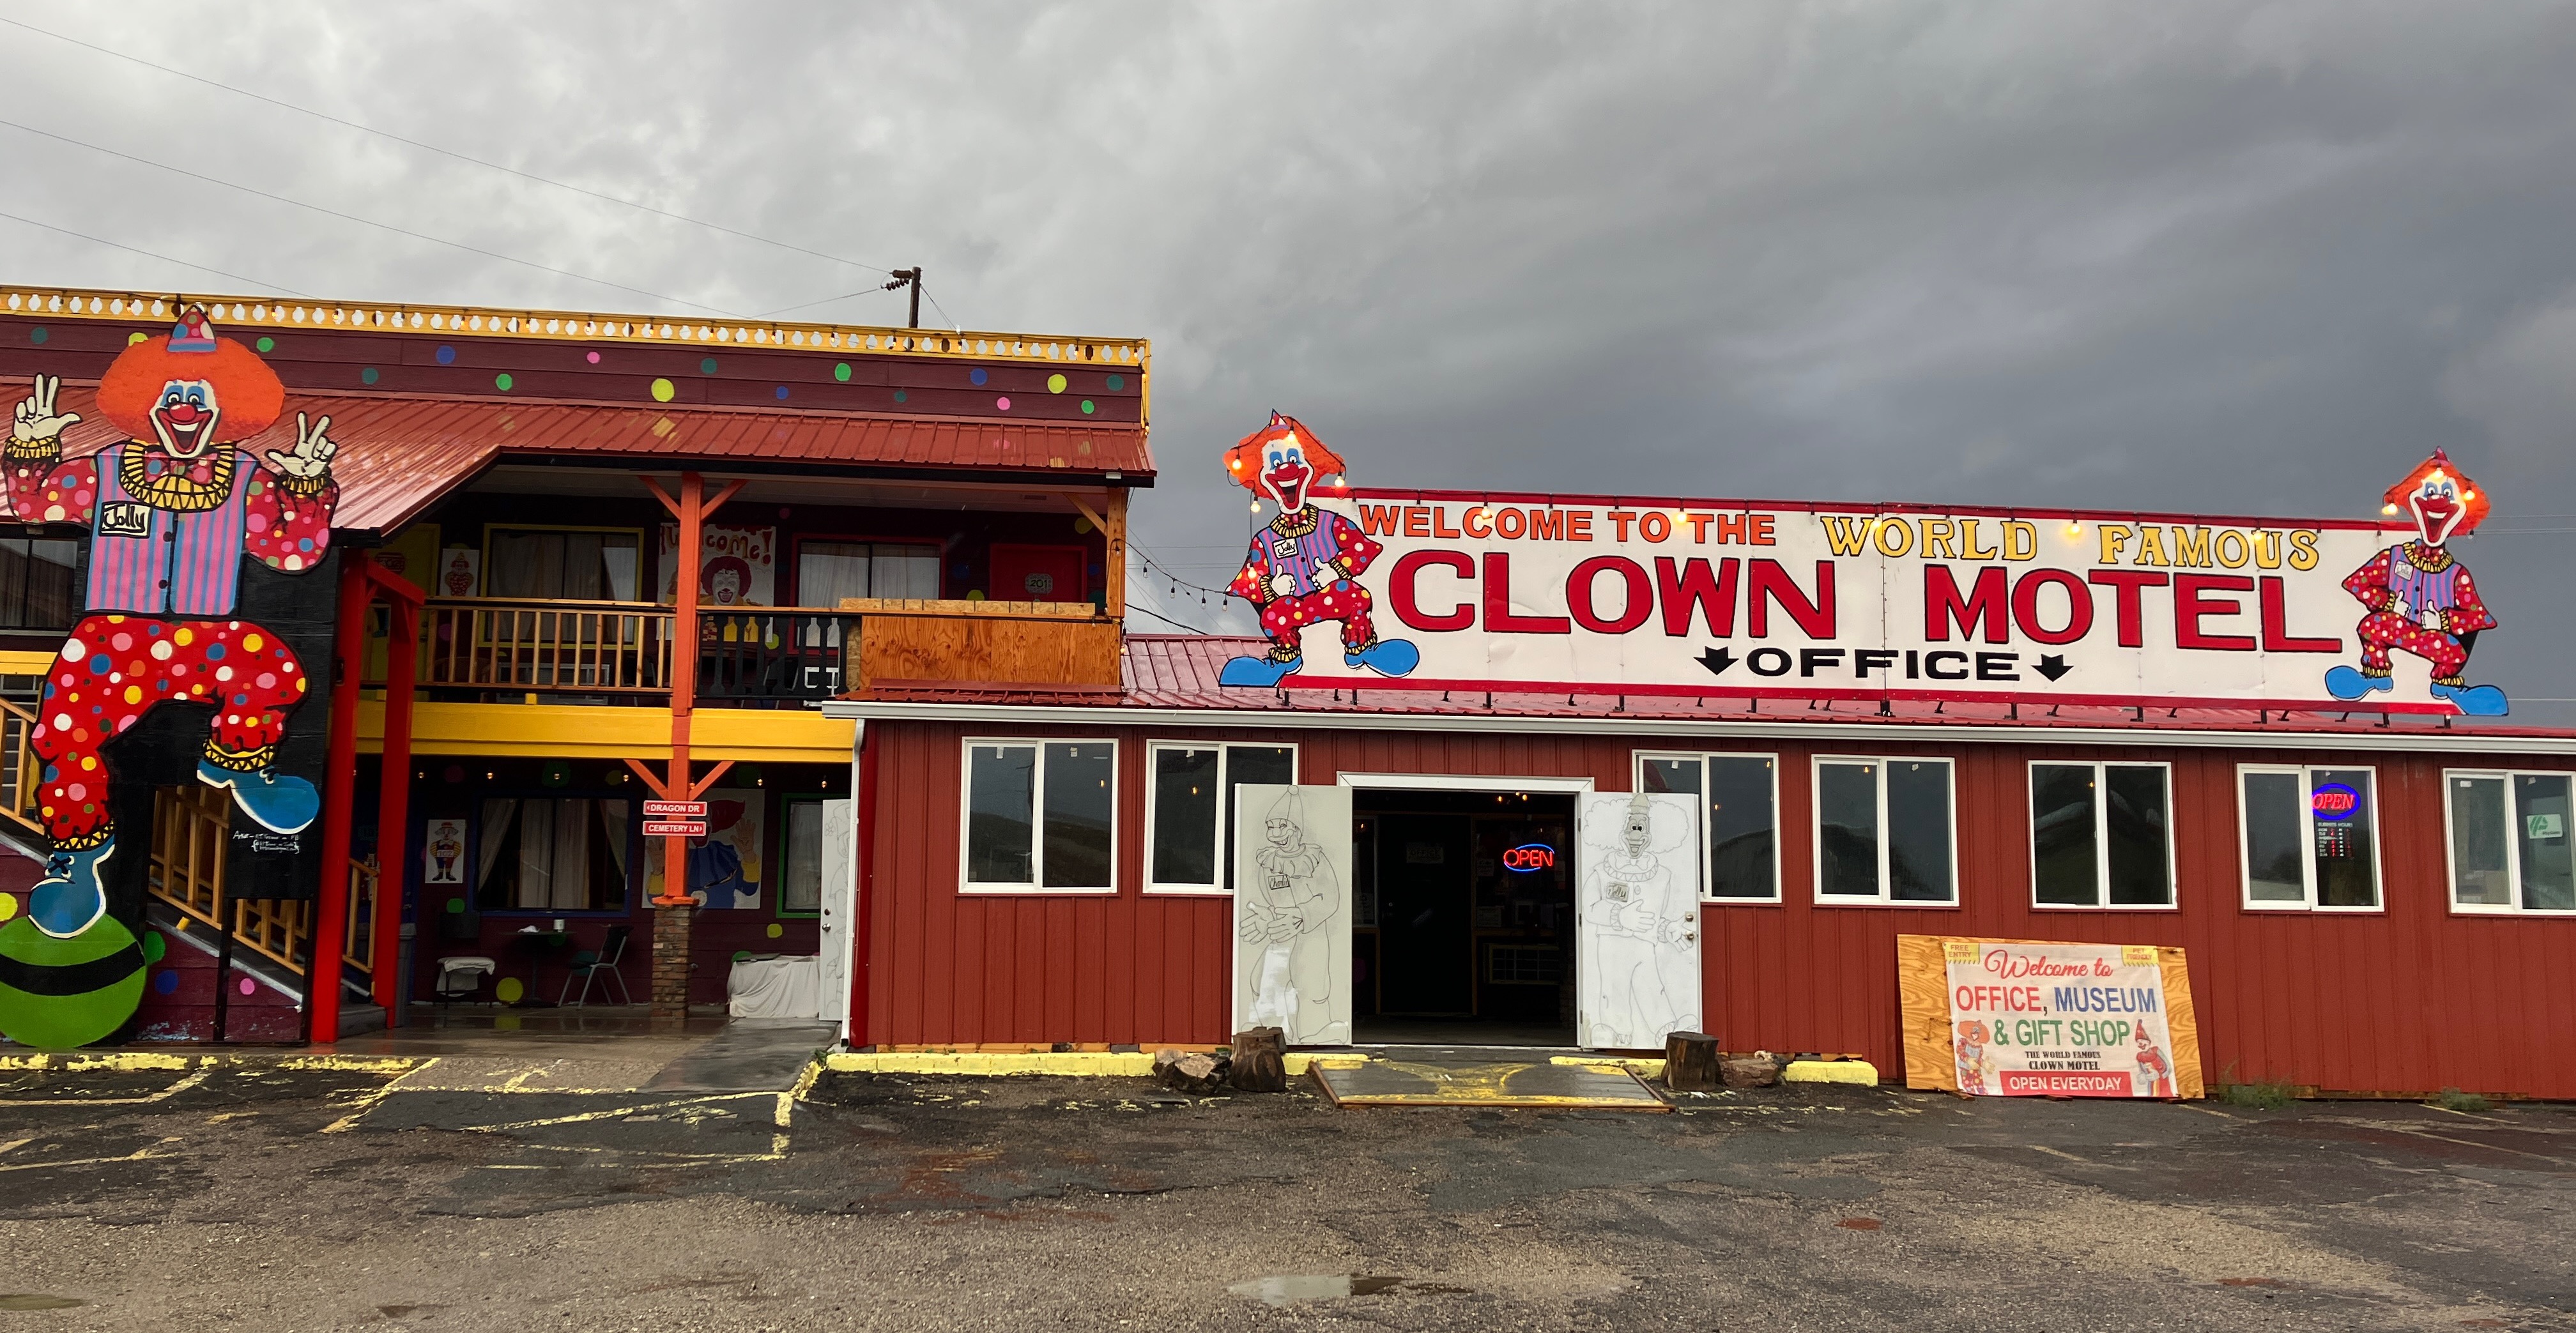 A motel with three large painted clowns decorating the exterior of the building.